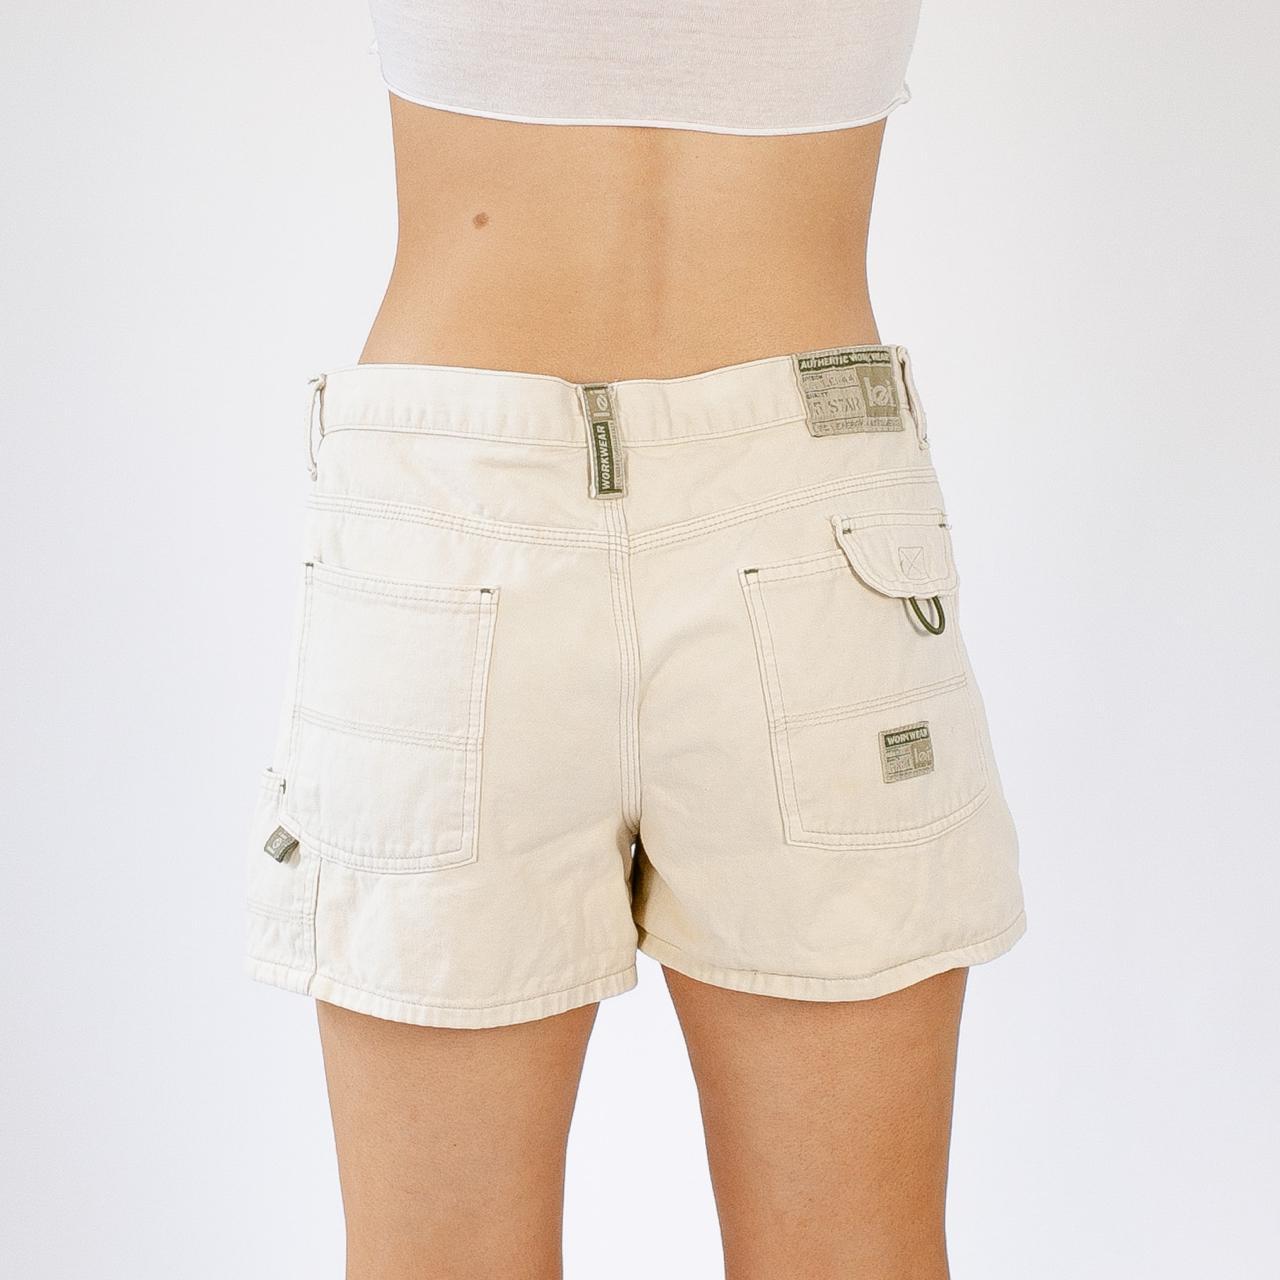 L.e.i. Women's Tan and Brown Shorts